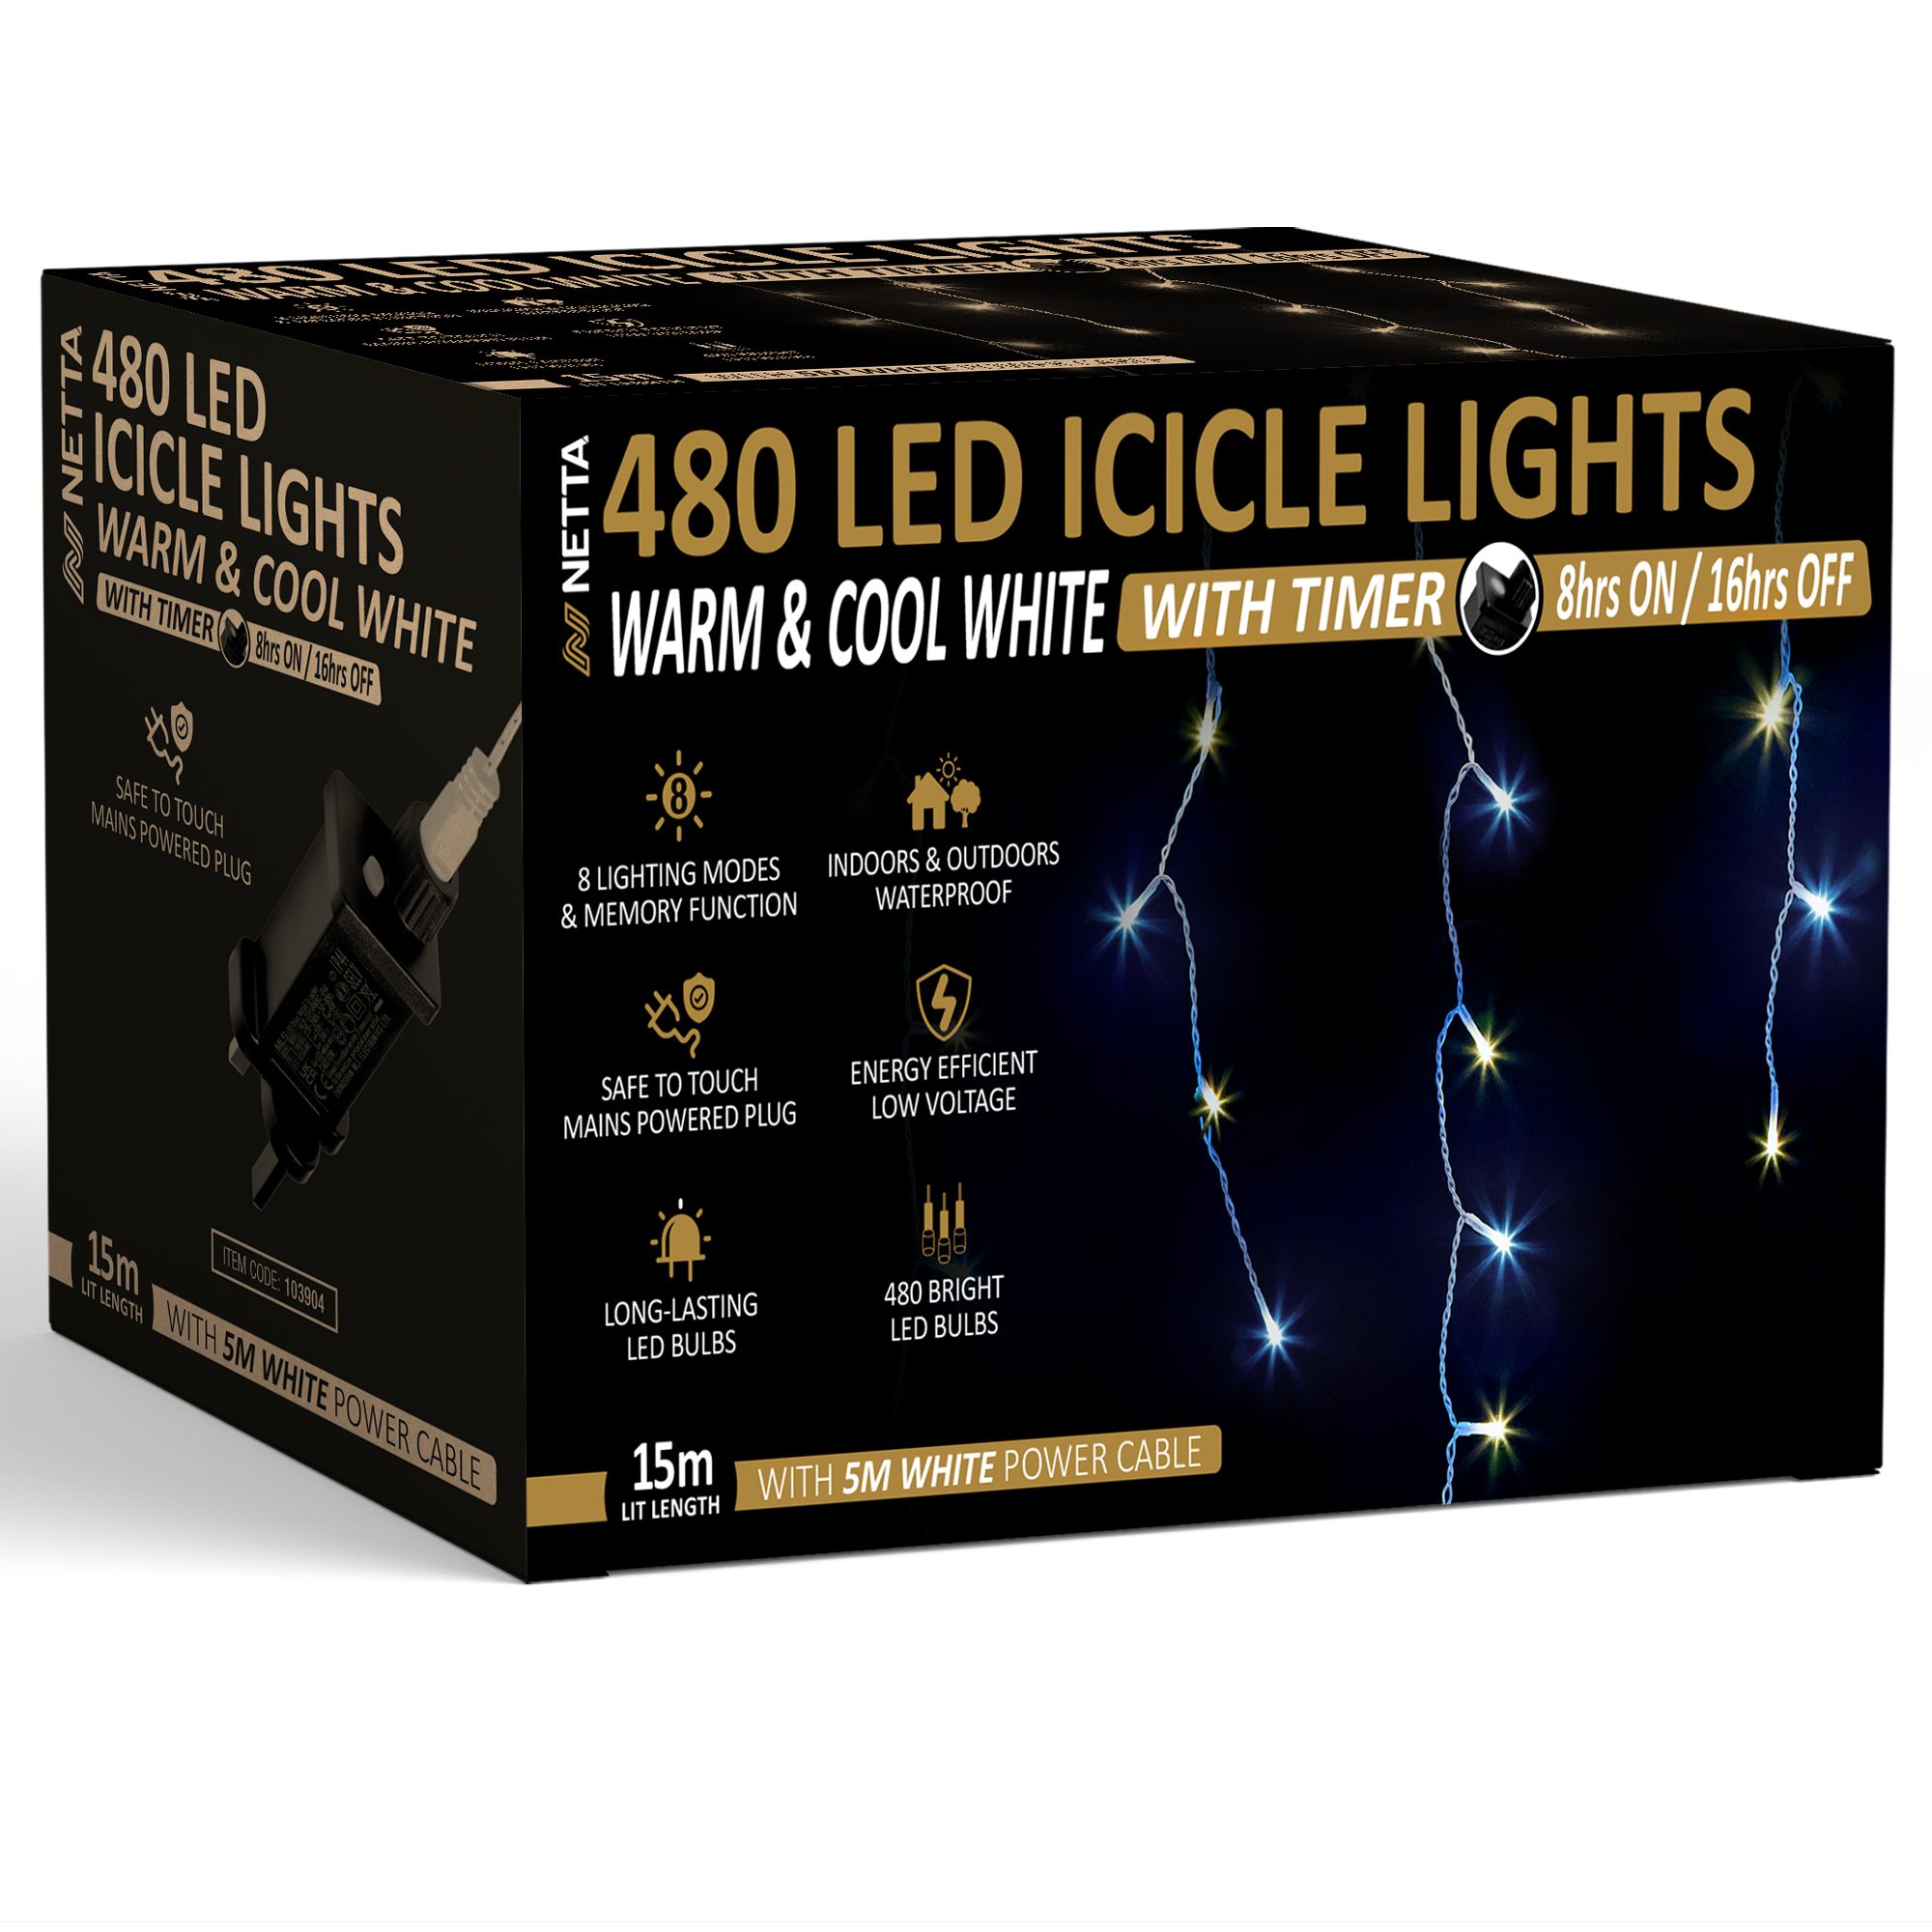 NETTA 480 LED Icicle Lights 15M Outdoor Christmas Lights - Warm White & Cool White, with White Cable